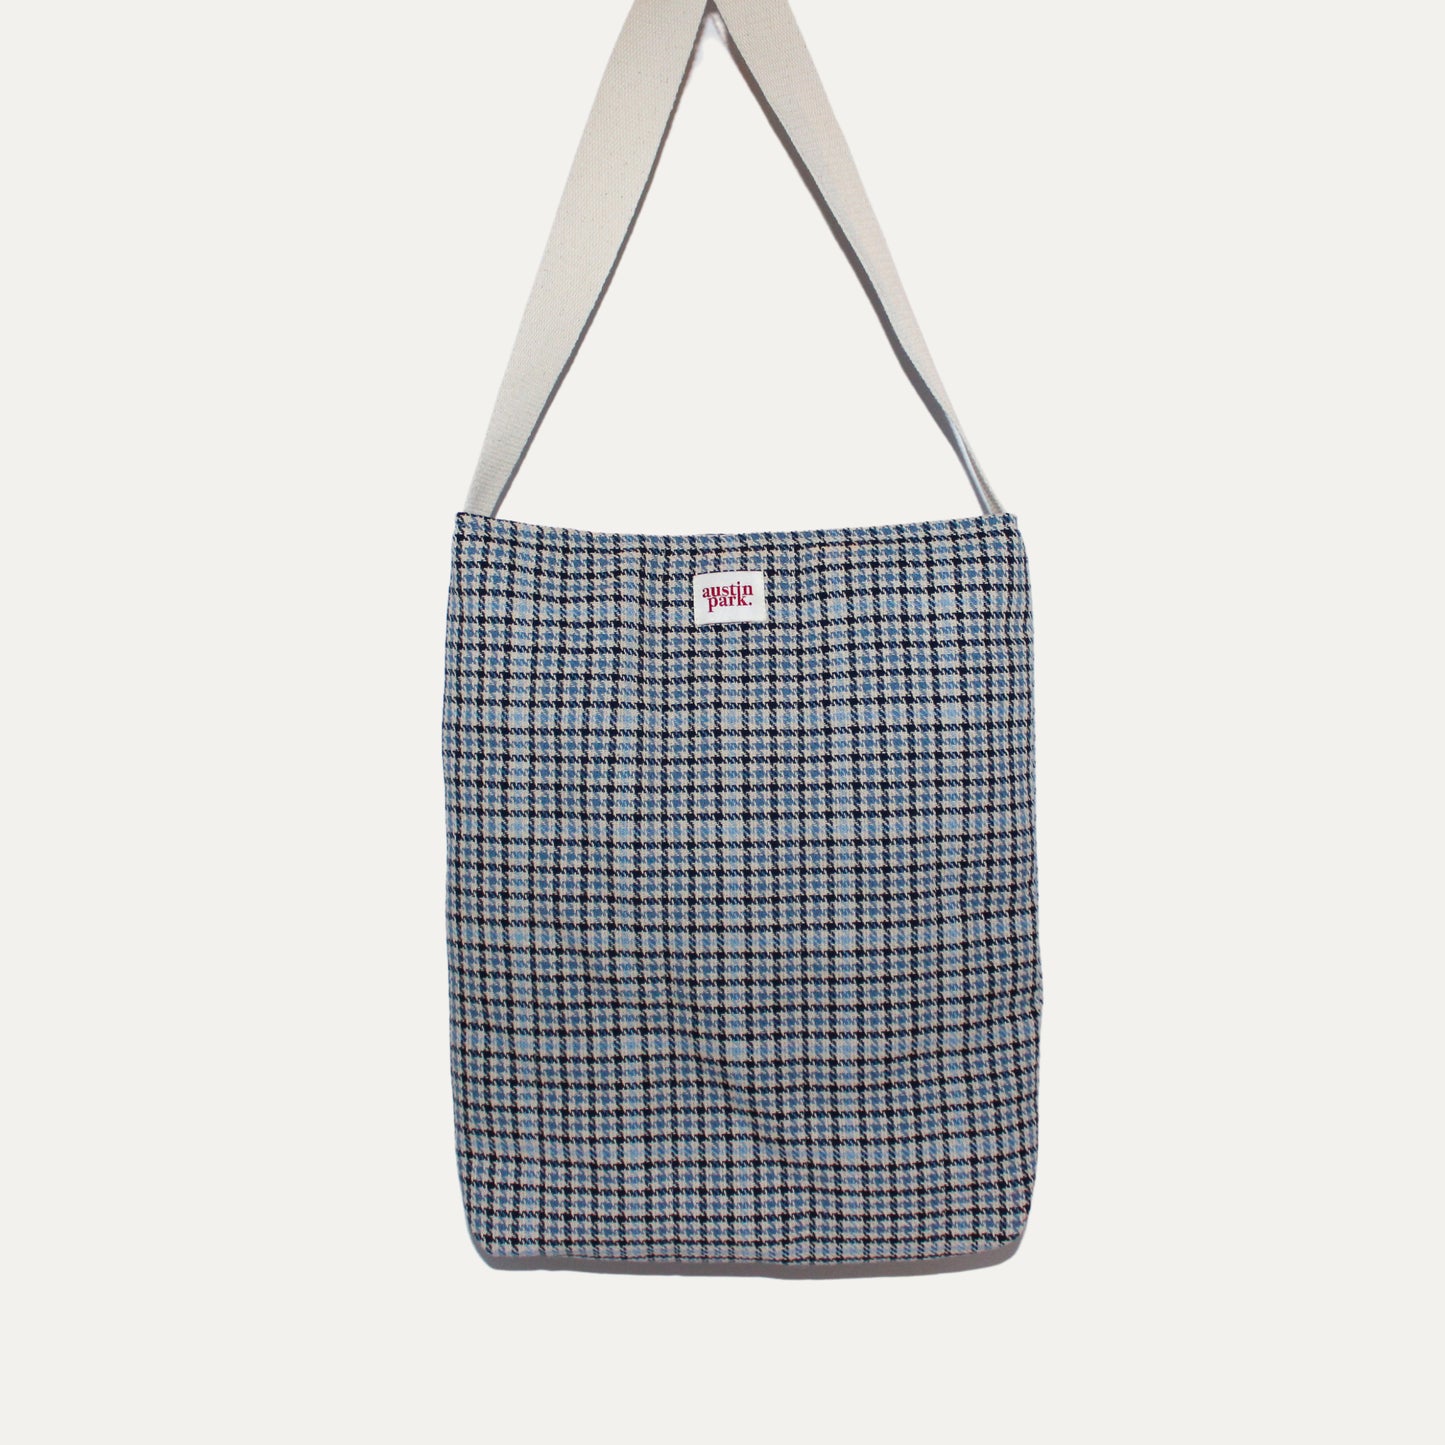 Quilted Market Tote Bag - Blue Houndstooth